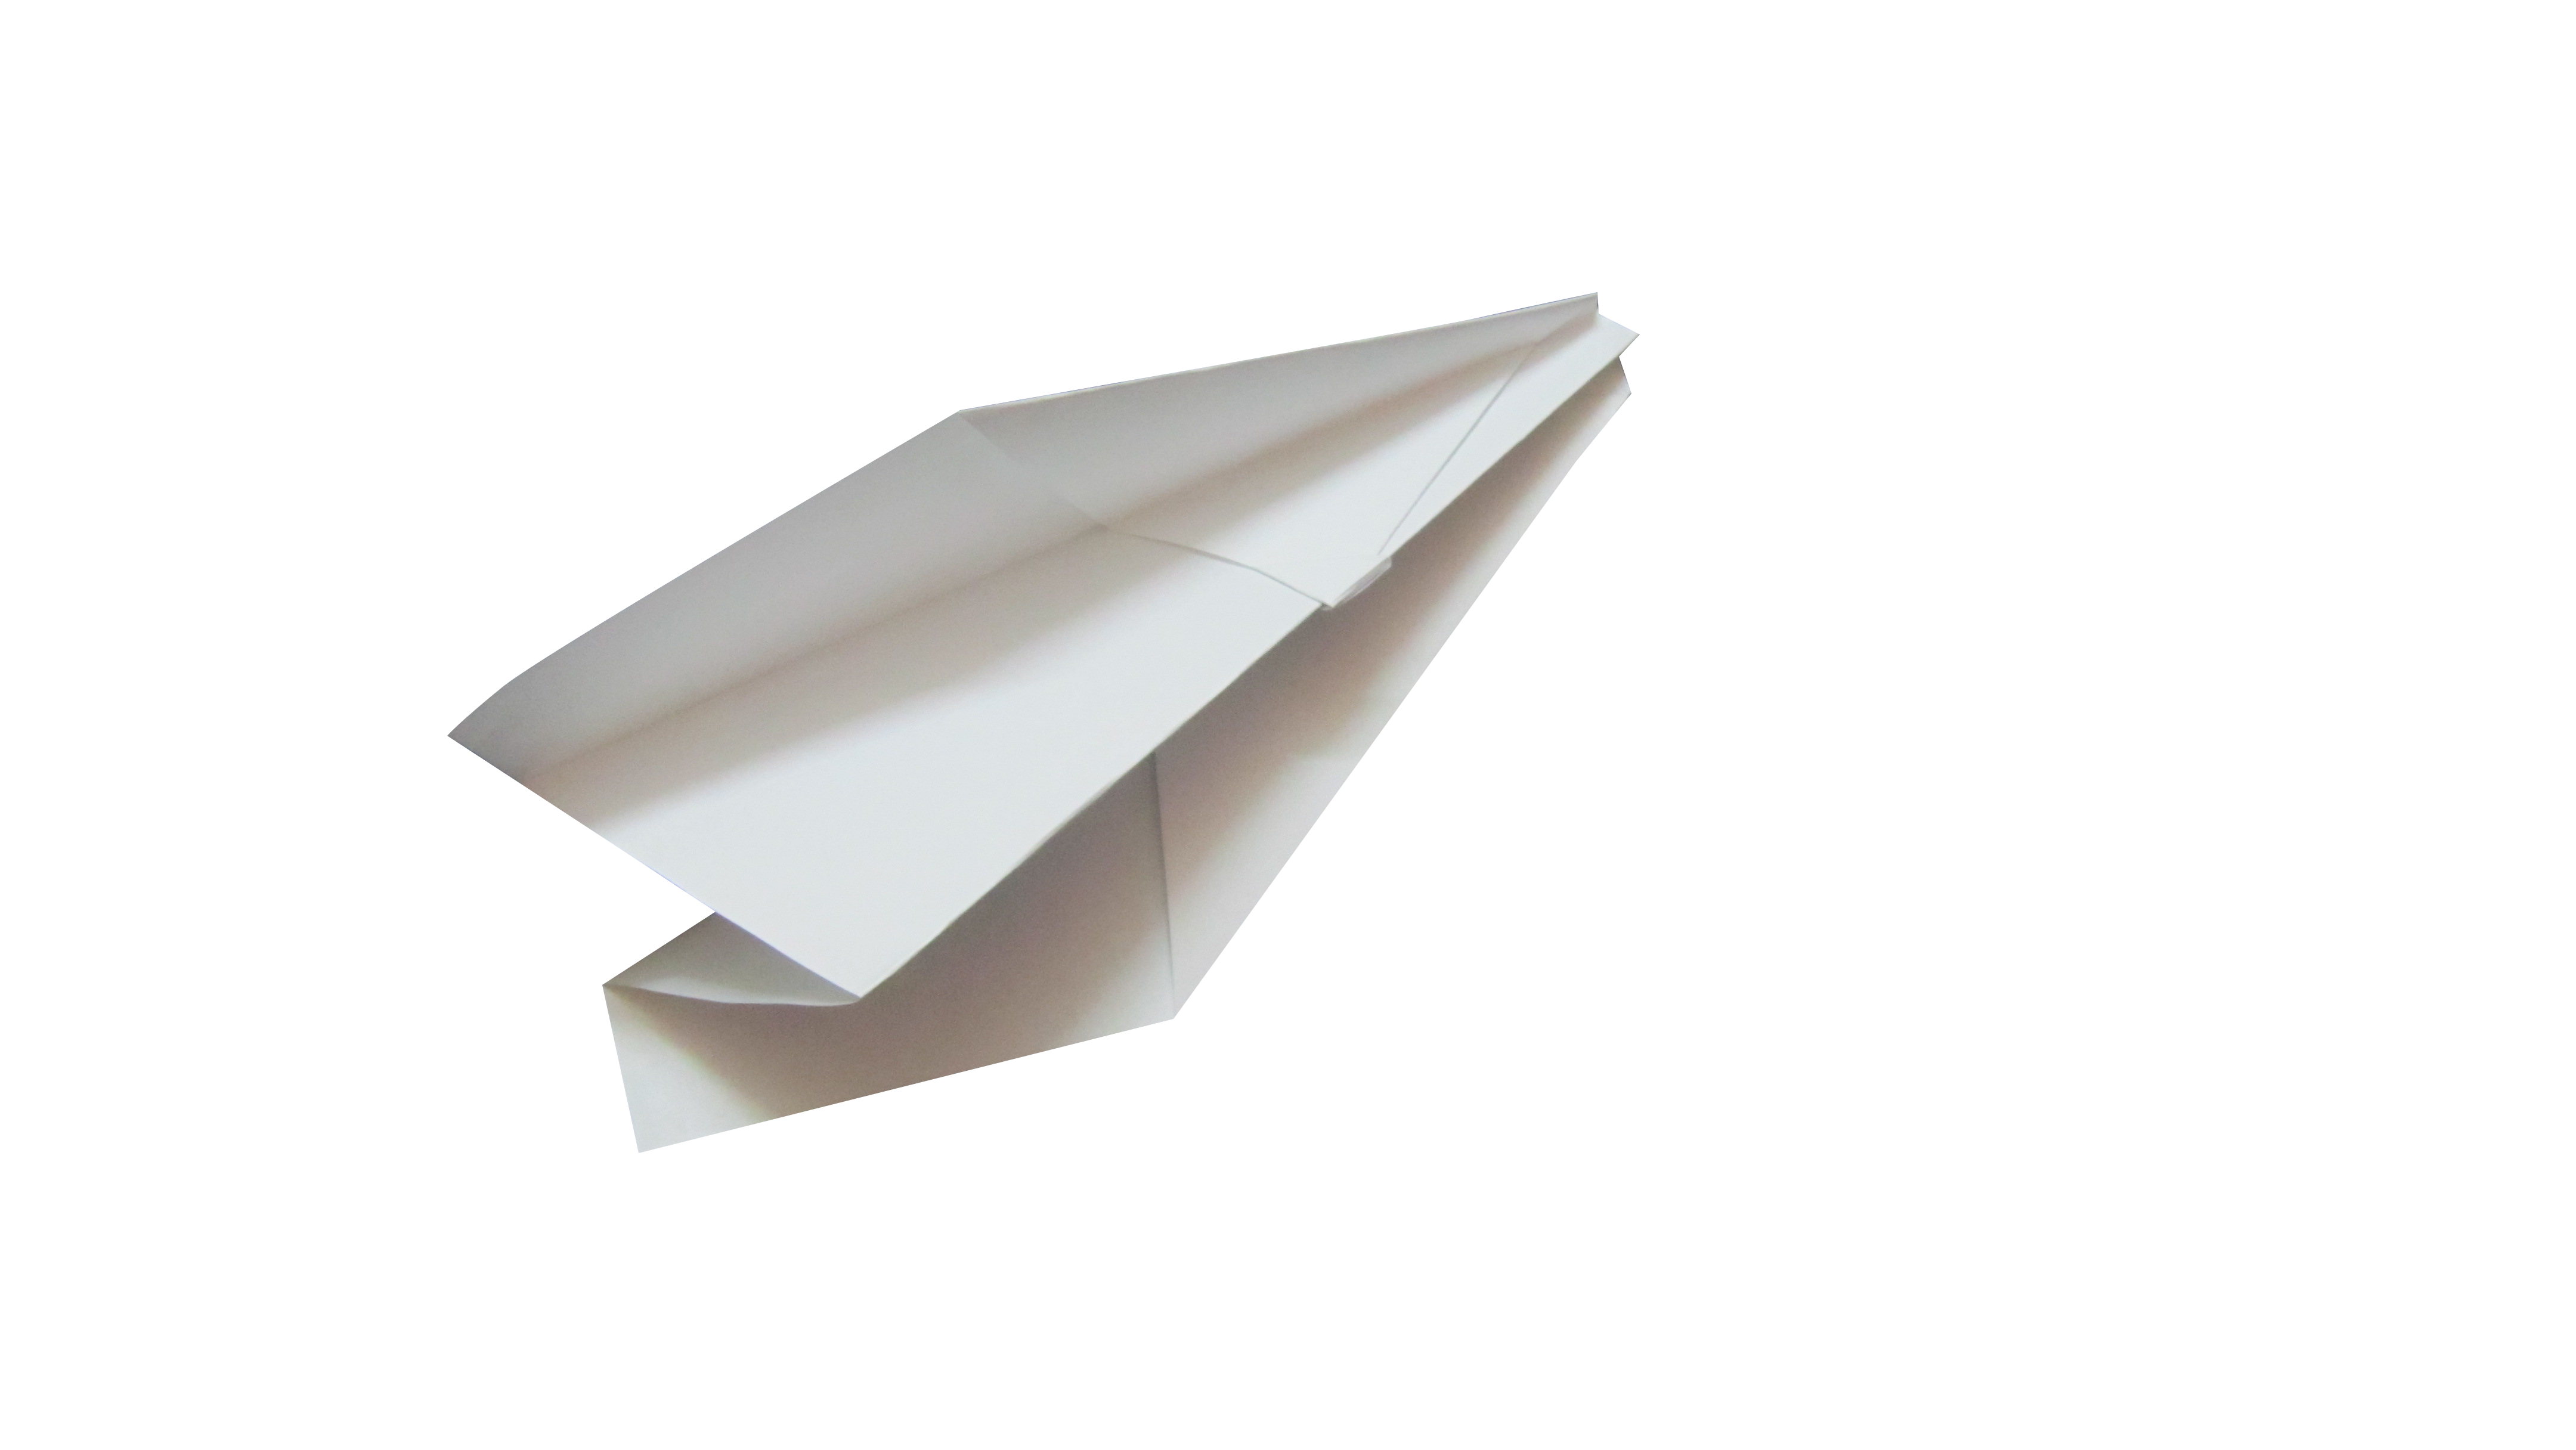 paper plane, where can buy paper airplanes original papers #31542